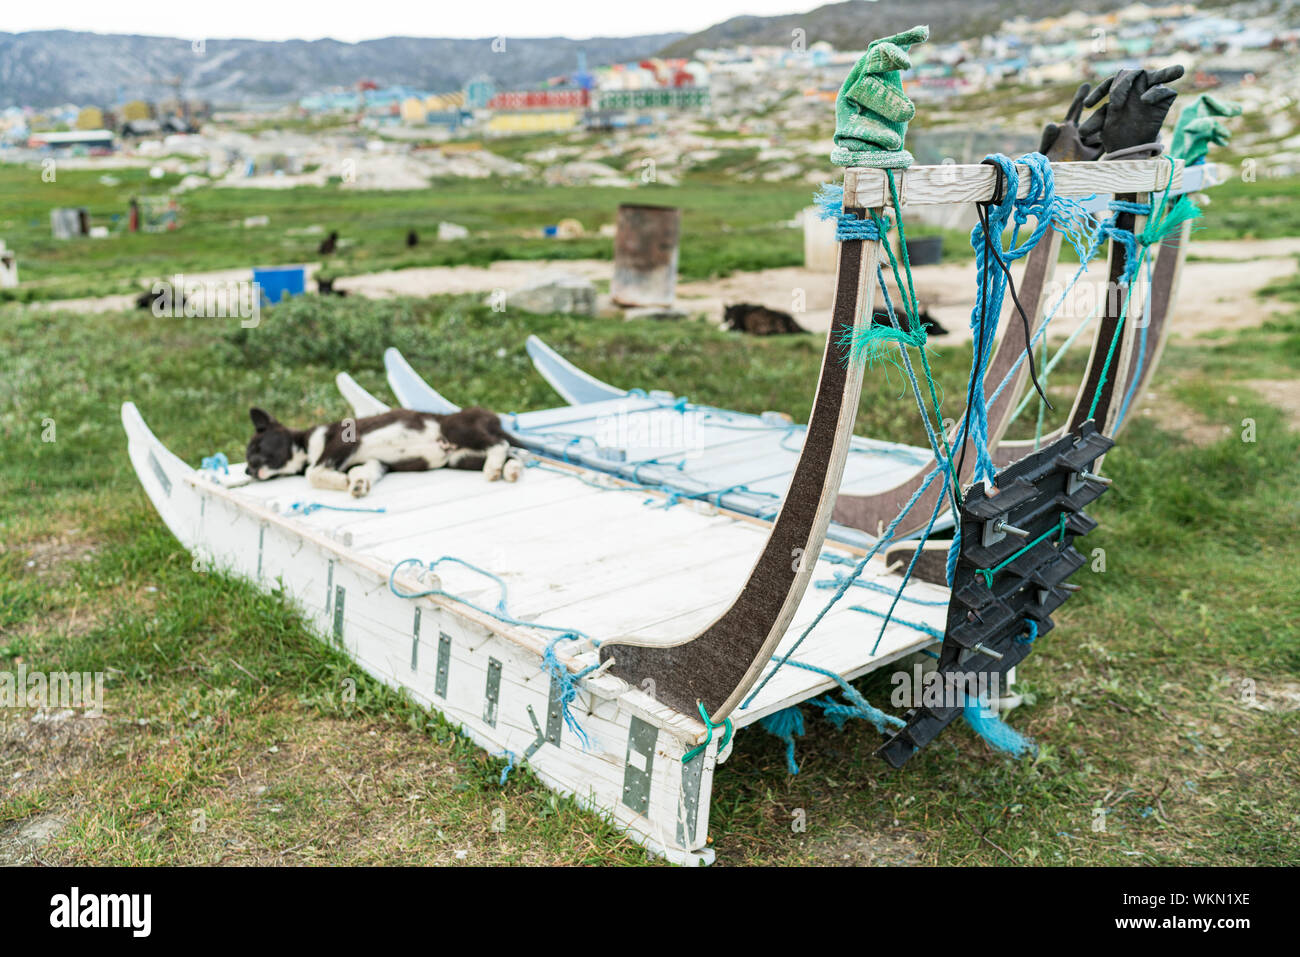 Greenland dog sled and husky sled dog puppy in Ilulissat Greenland. Two dog sleds parked in summer nature landscape on Greenland. Stock Photo